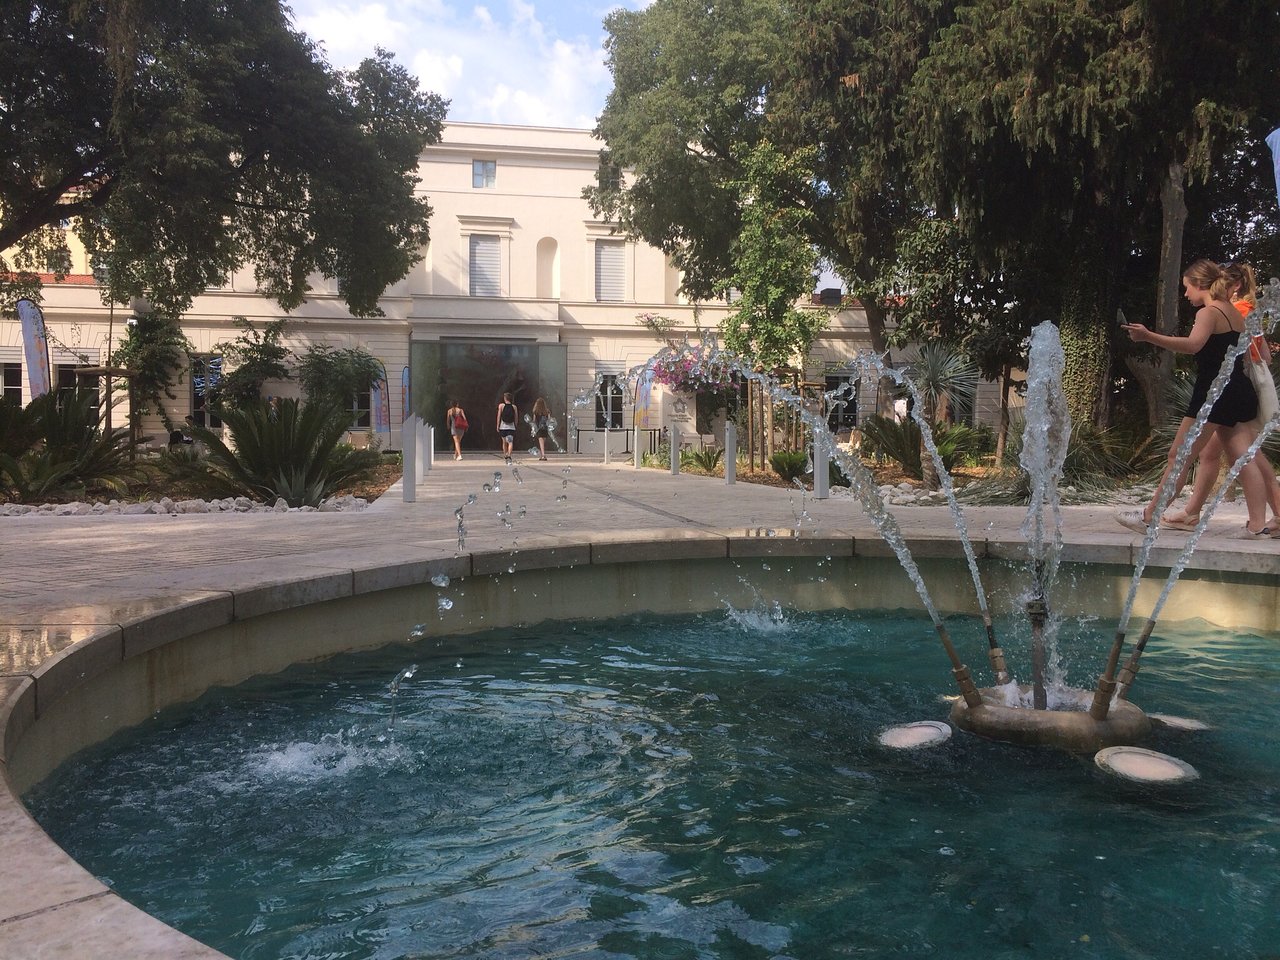 Le Jardin Des Plantes Montpellier Beau the top 10 Things to Do Near Nabab Montpellier Tripadvisor